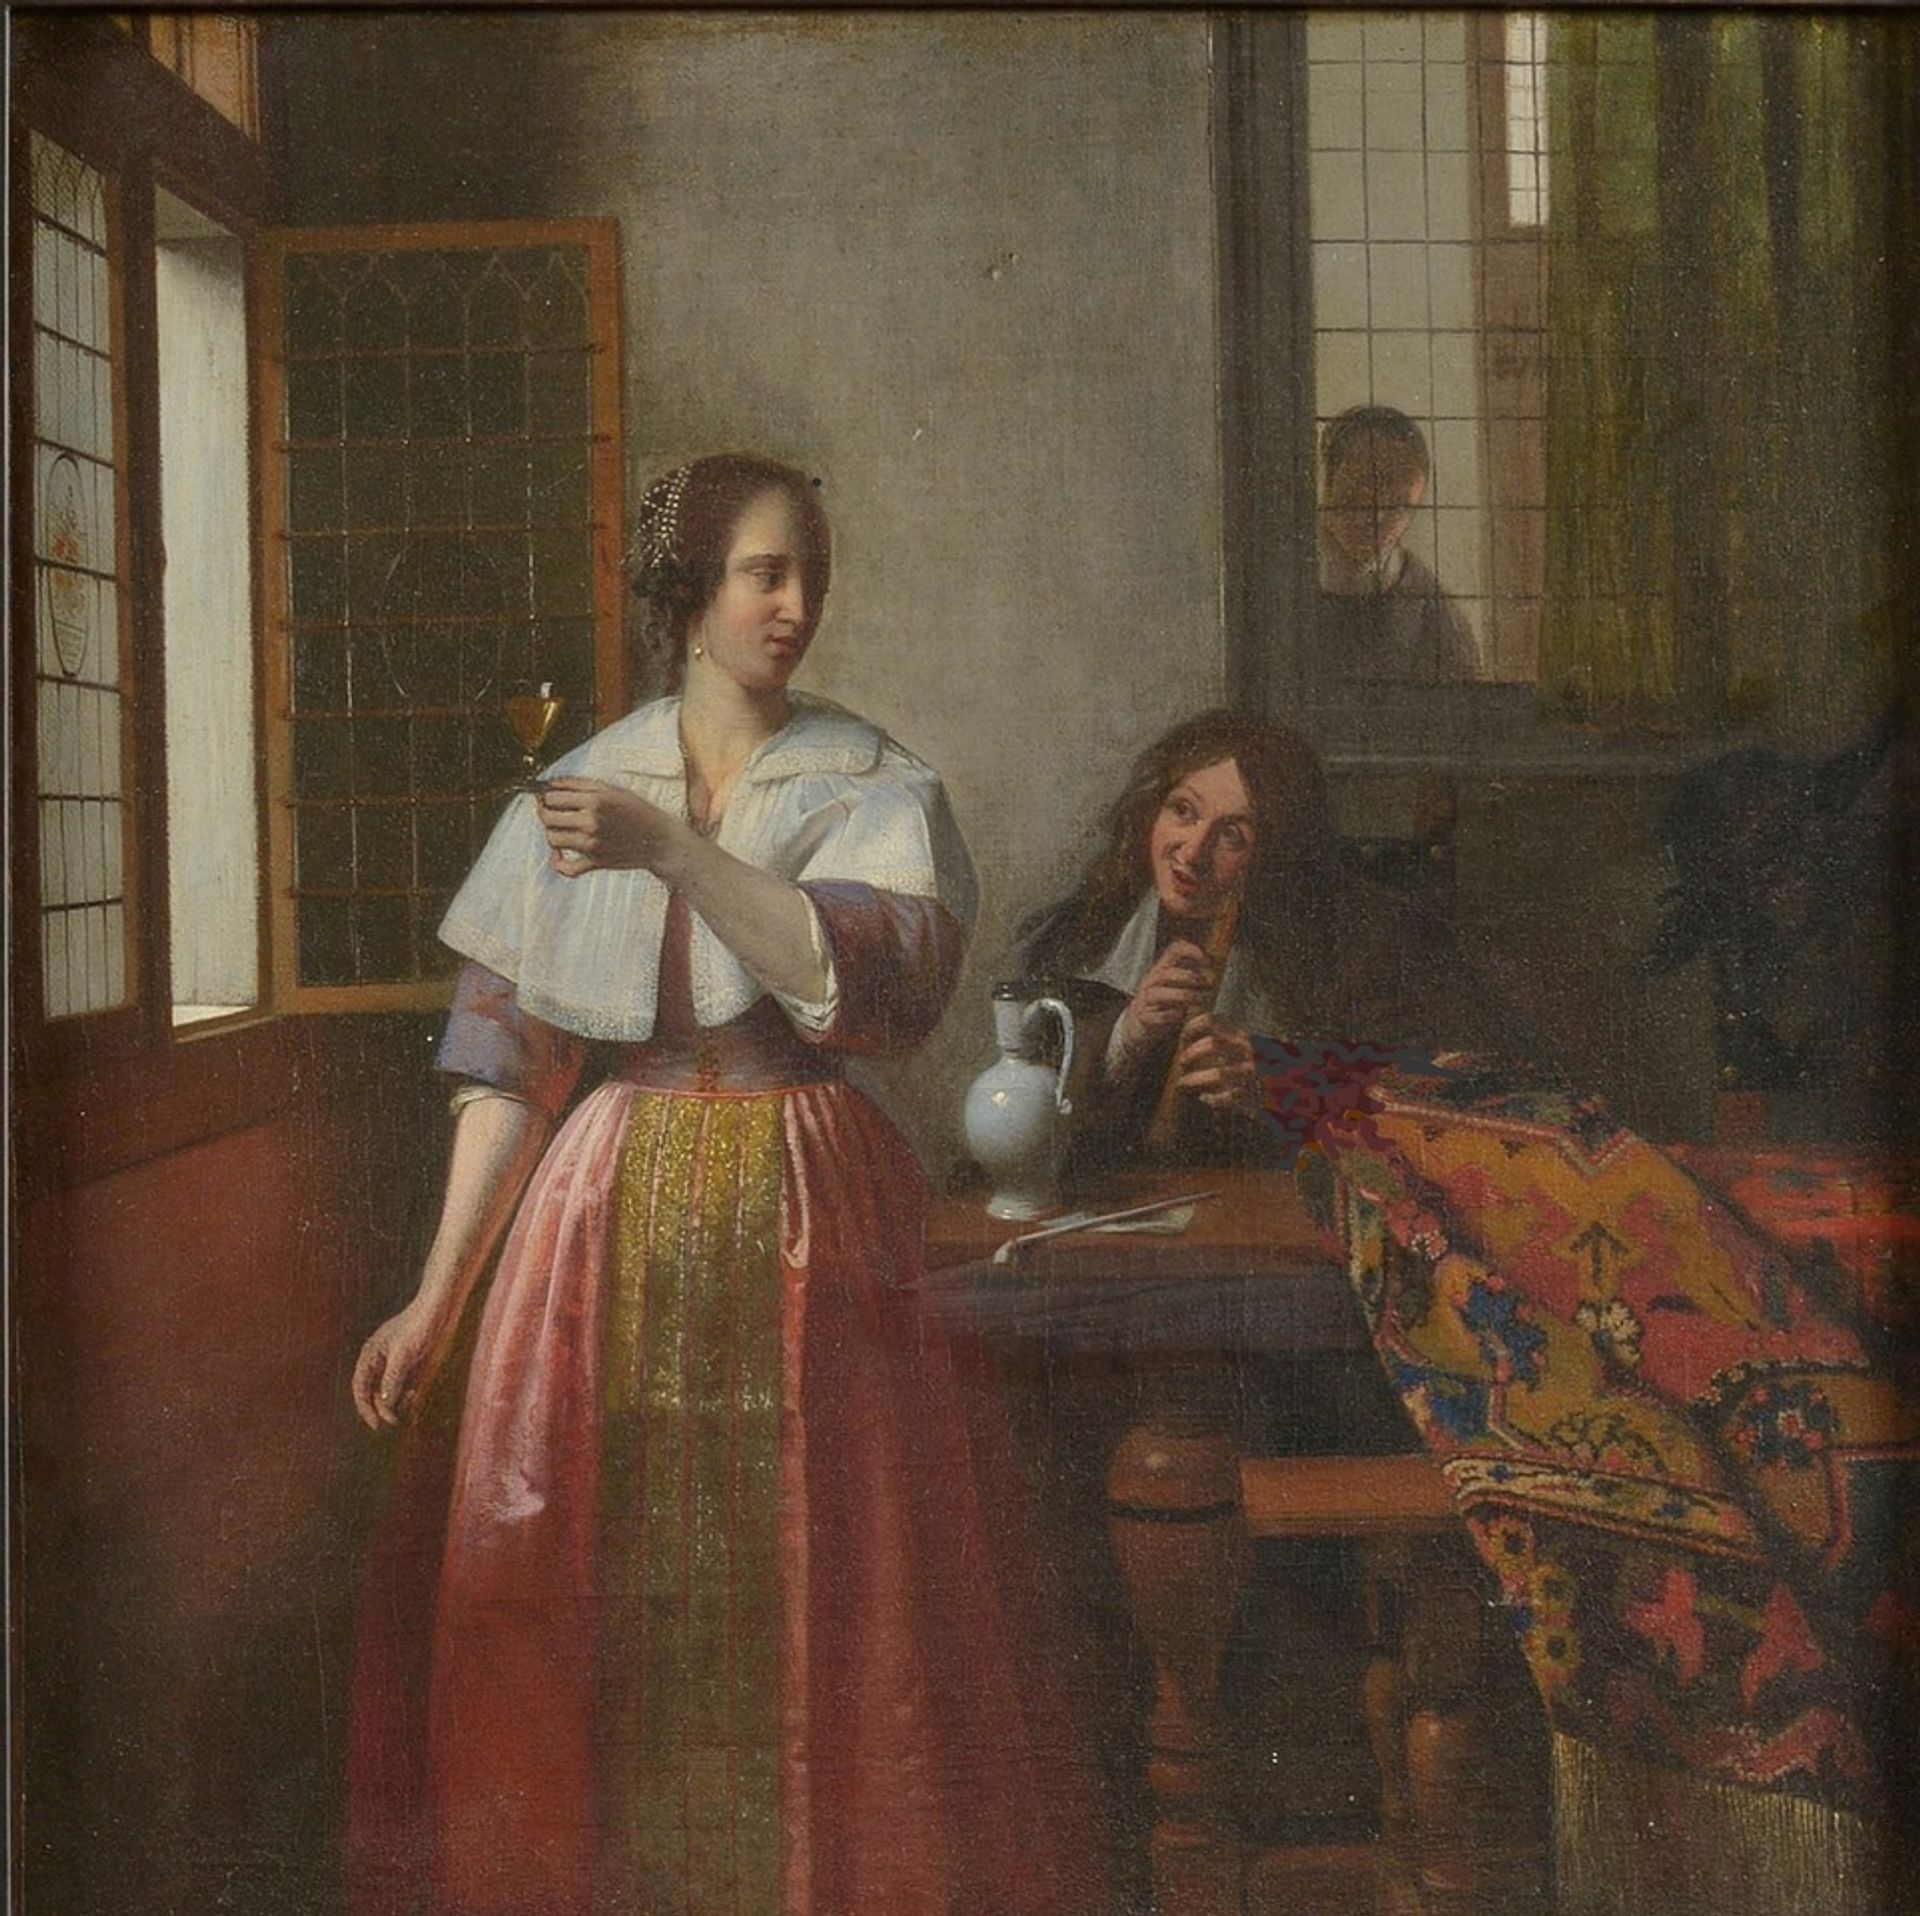 A Young Woman with a Wine Glass and a Musician playing a Tenor Recorder is thought to be a copy of a lost work by Vermeer Courtesy of Kaizerskapel, Antwerp